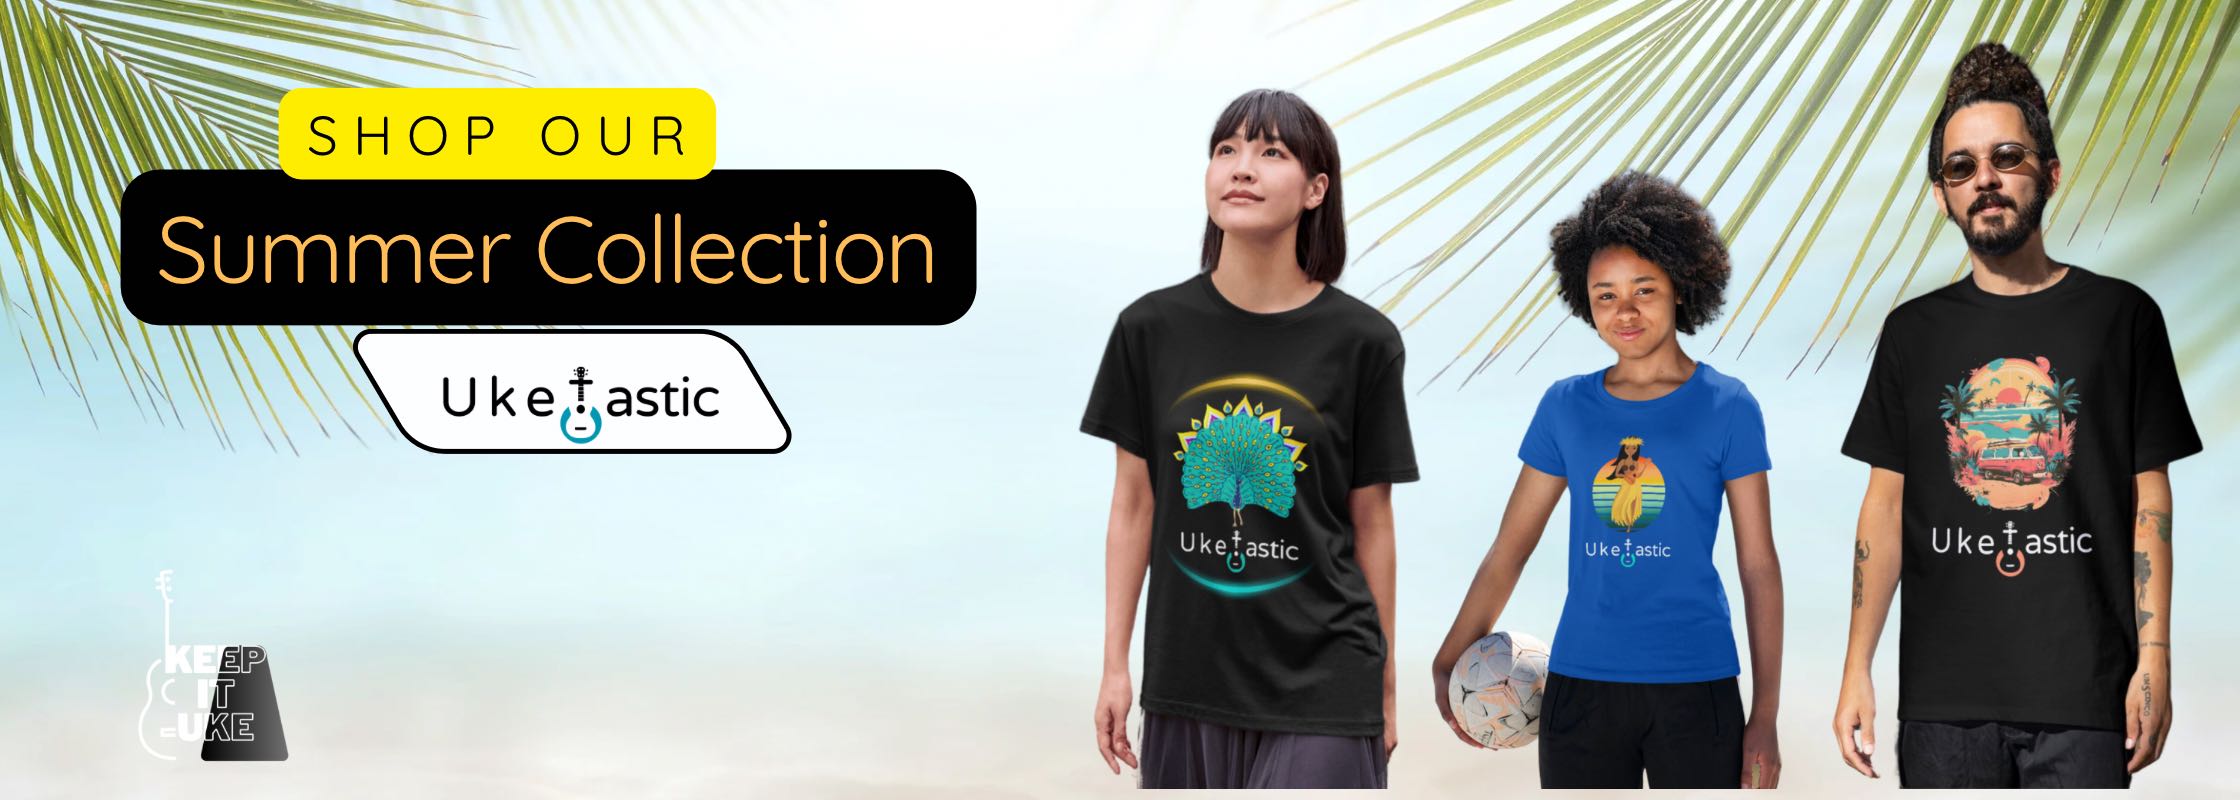 Summer collection banner large